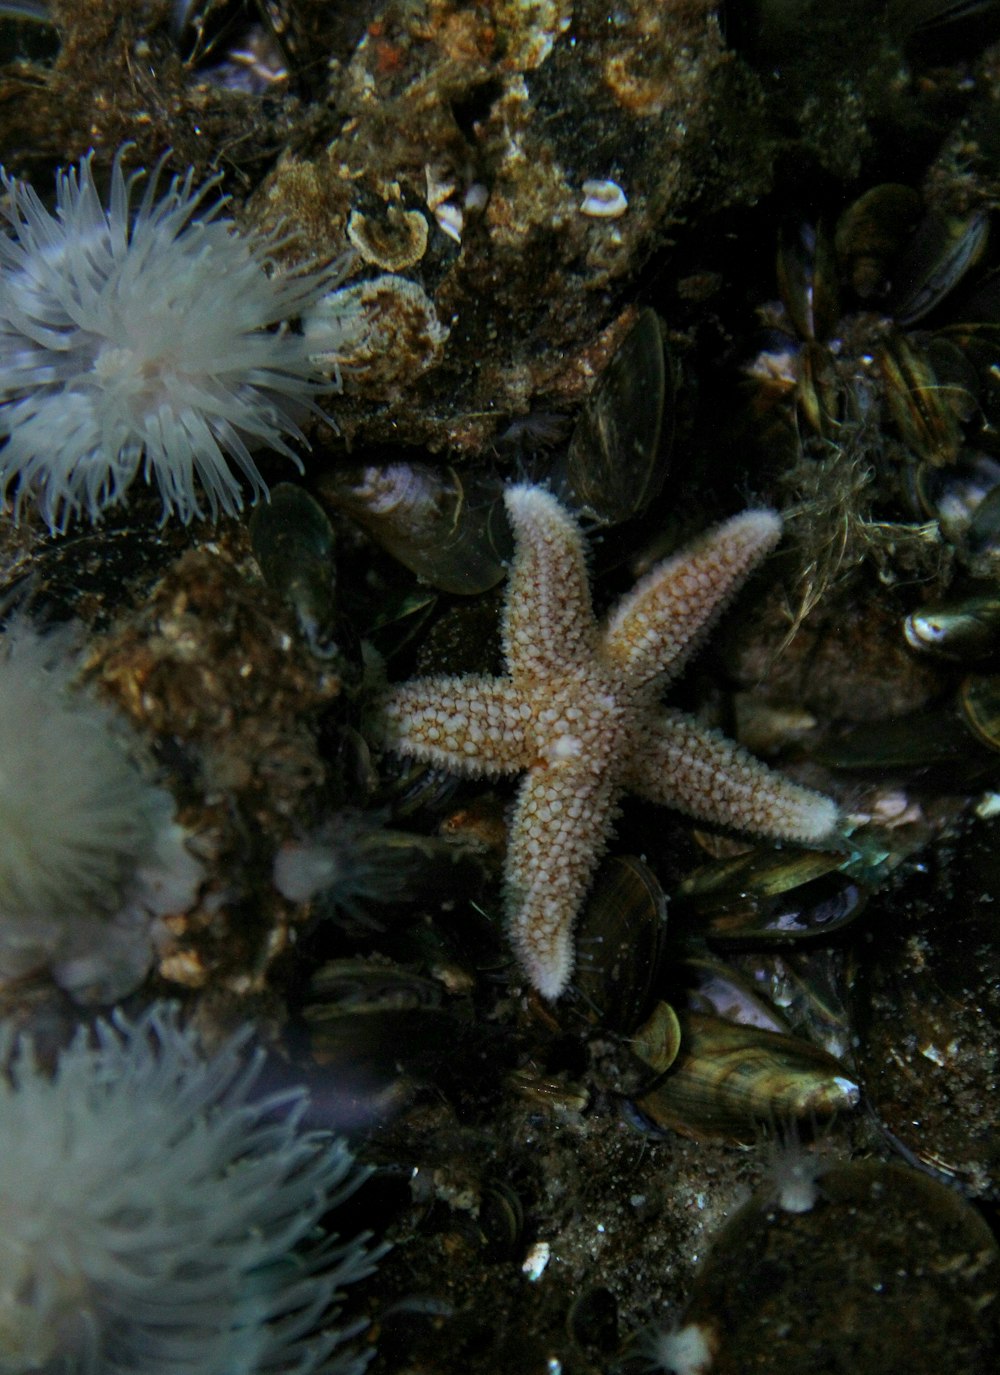 a starfish in the water surrounded by sea urchins